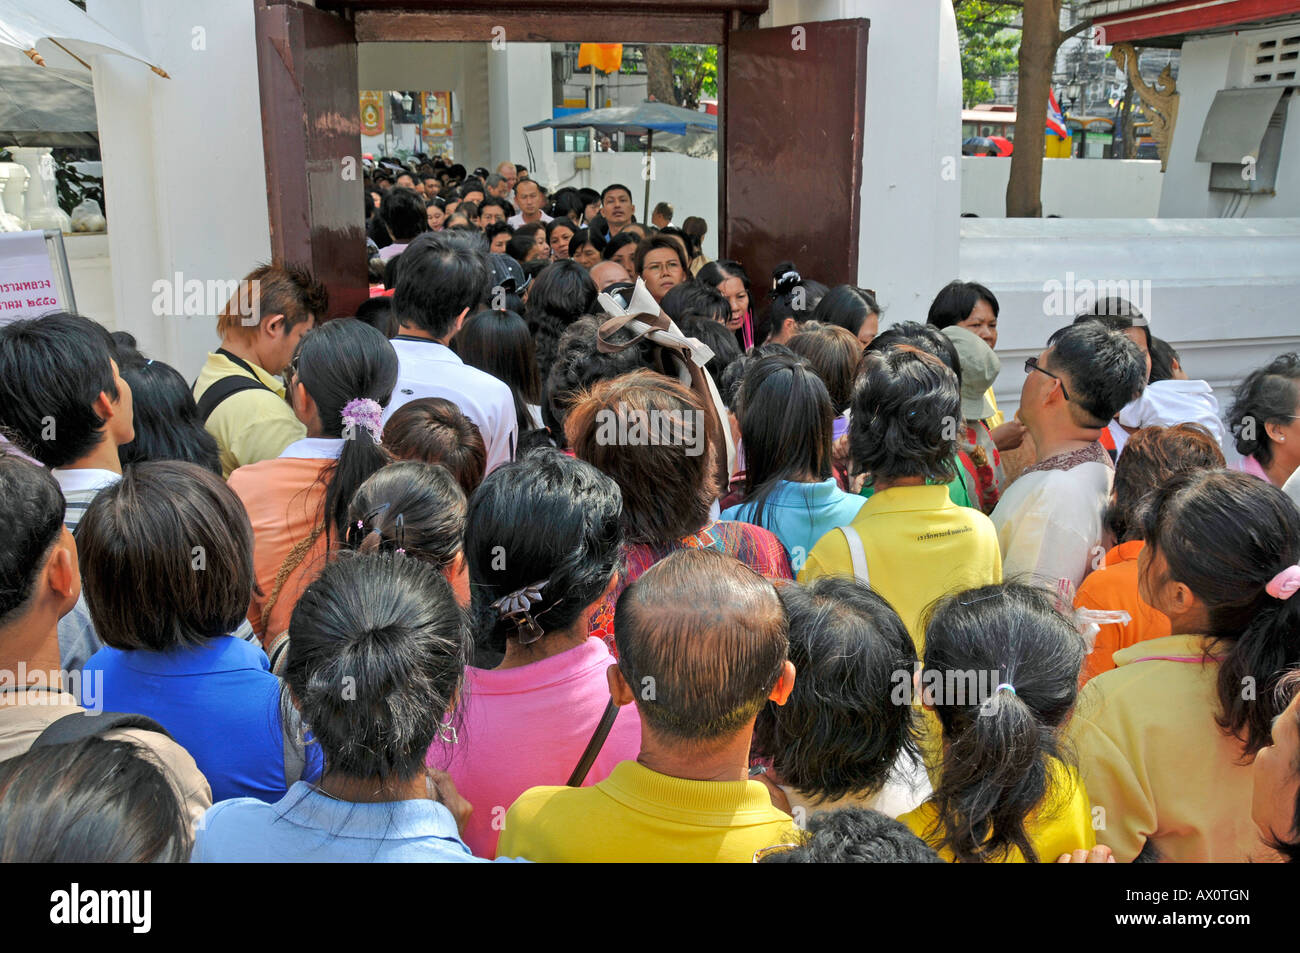 Crowd of people, New Year's, Wat Chana Songkhram Temple, Bangkok, Thailand, Southeast Asia Stock Photo